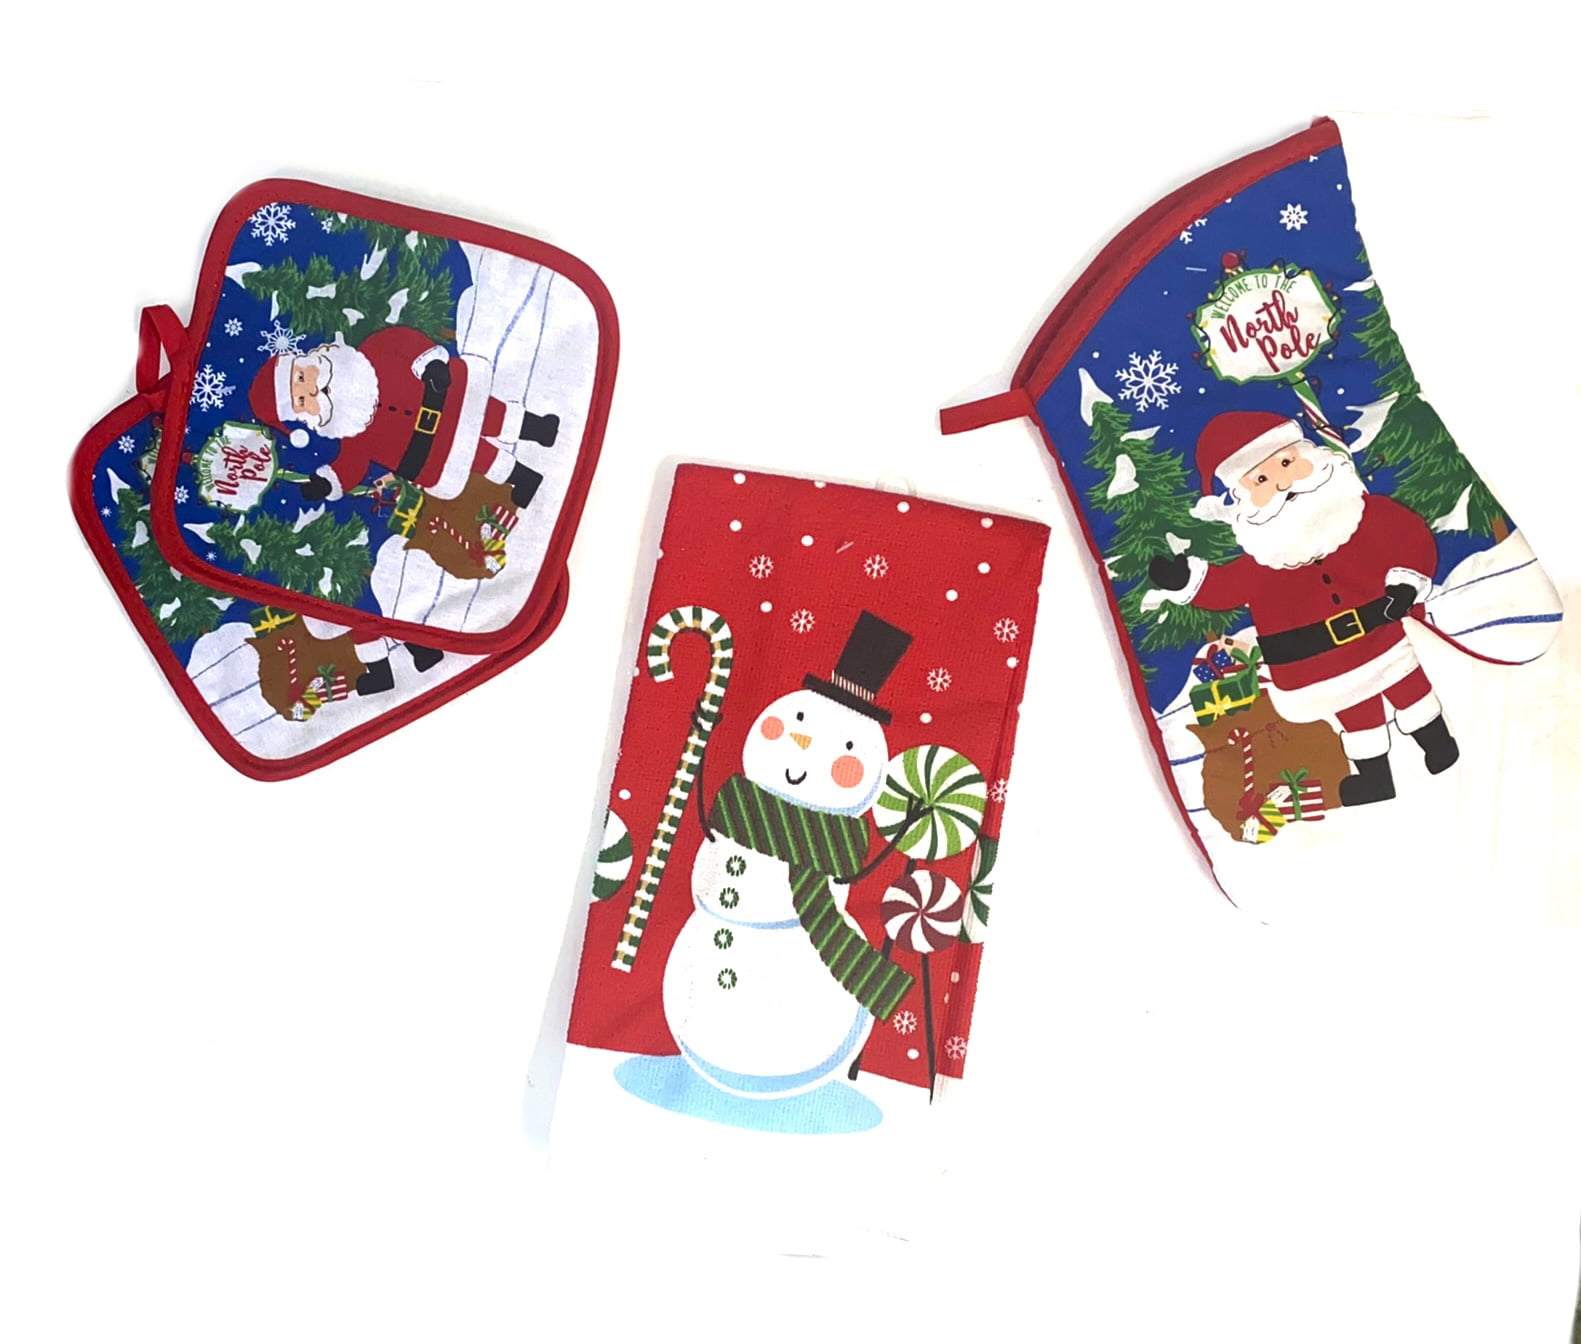 Oven Mitts Select Ite Towels Details about   Christmas Linen Frosty ‘Let It Snow’ Pot Holders 